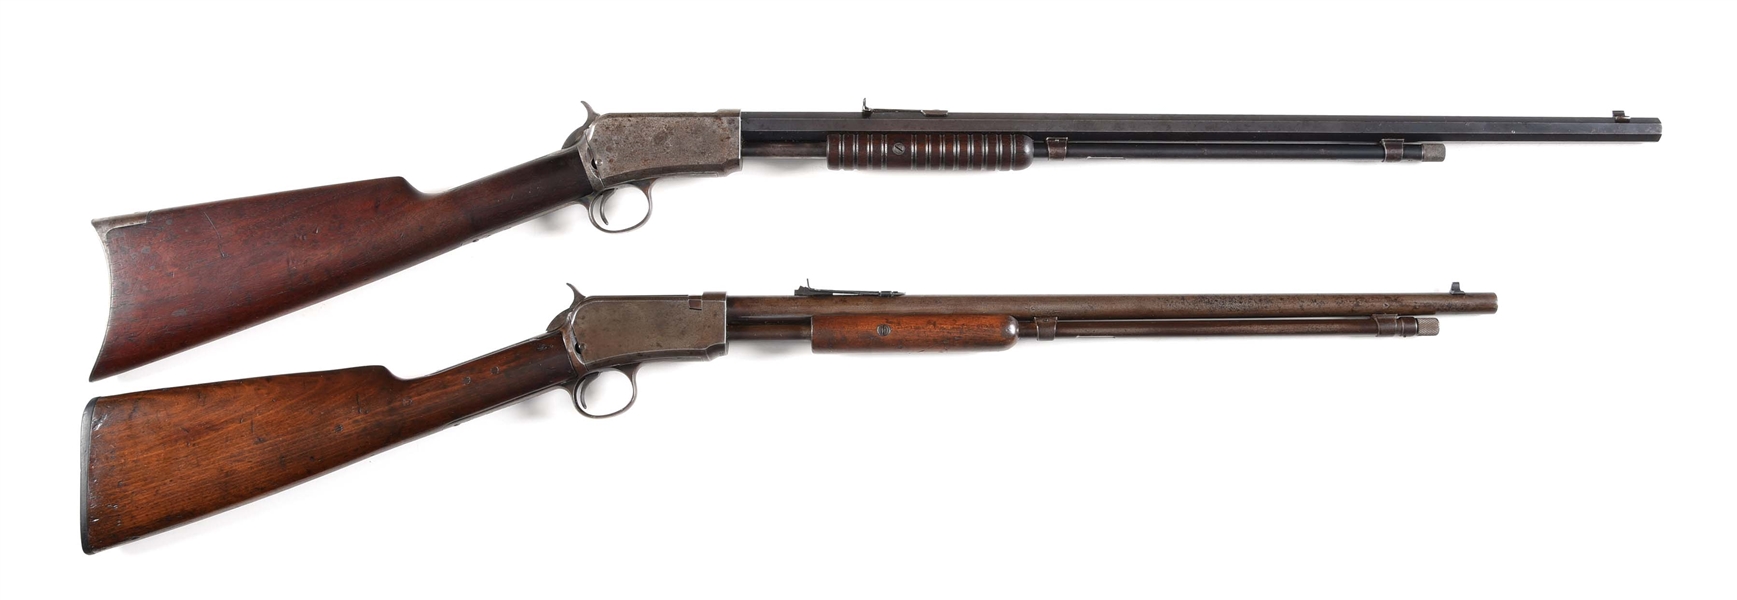 (C) LOT OF 2: WINCHESTER MODELS 1890 AND 1906 SLIDE ACTION RIFLES.